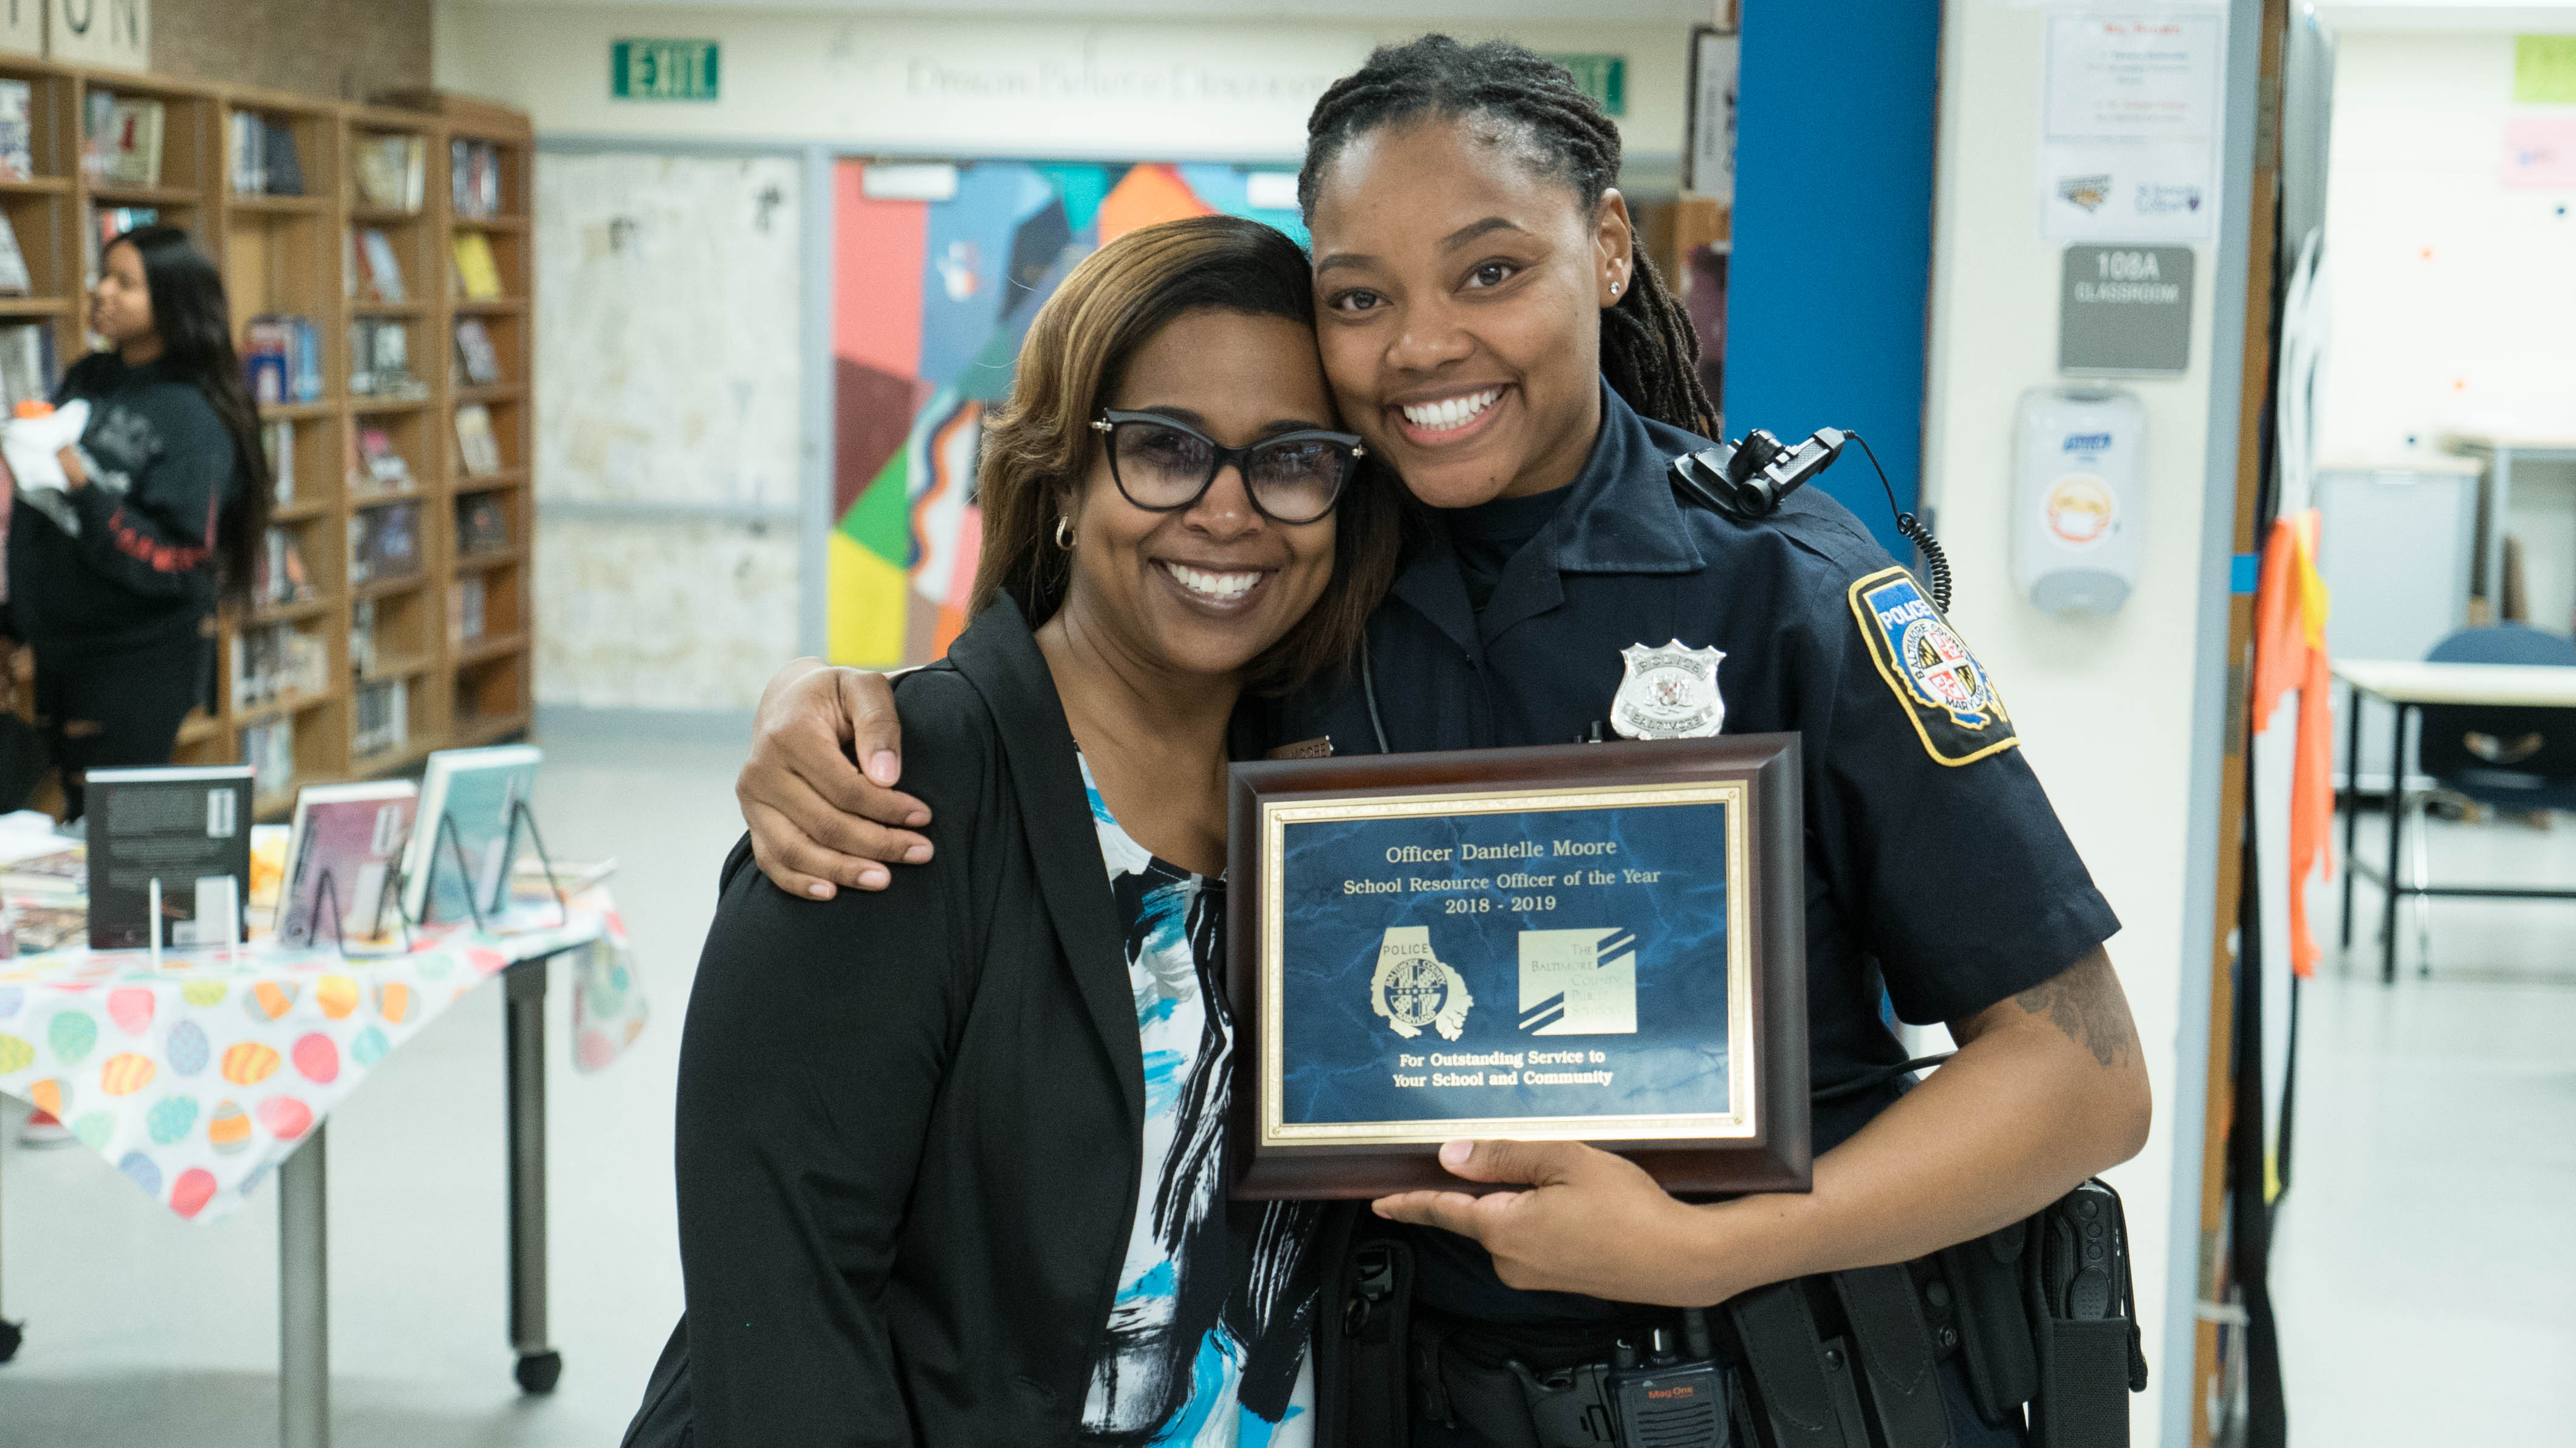 Overlea High Resource Officer Named SRO of the Year